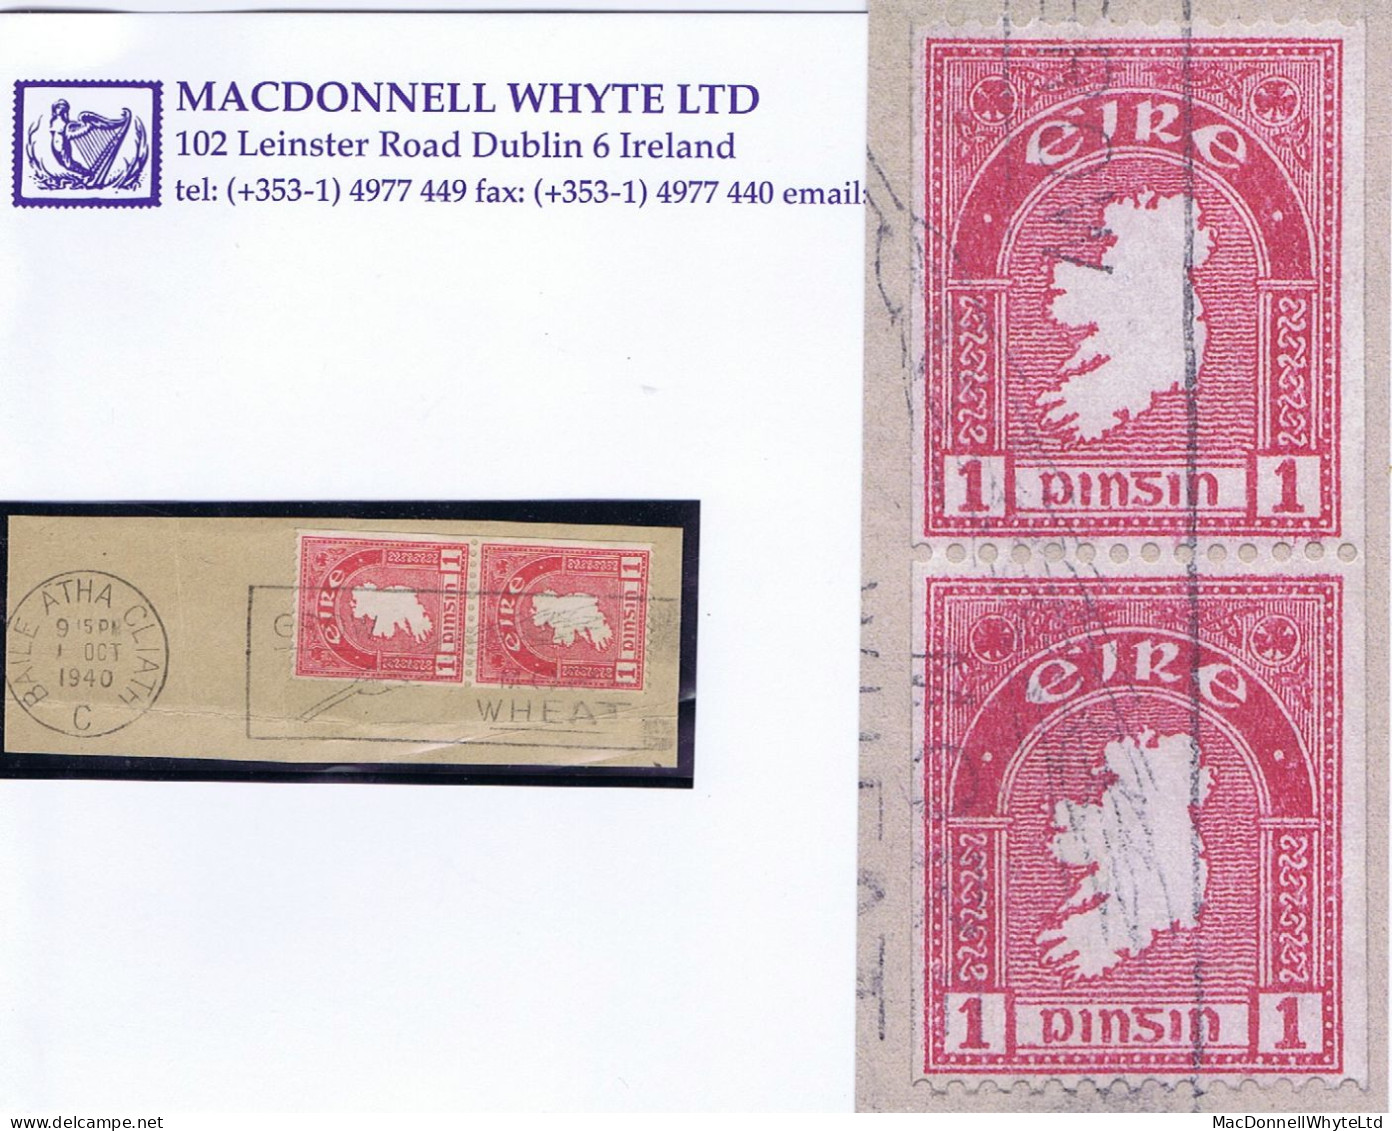 Ireland 1940 E Vertical Coils Perf. 14 X Imperf., 1d Map Pair Fresh Used On Piece, Dublin Machine 1 OCT 1940 - Usati